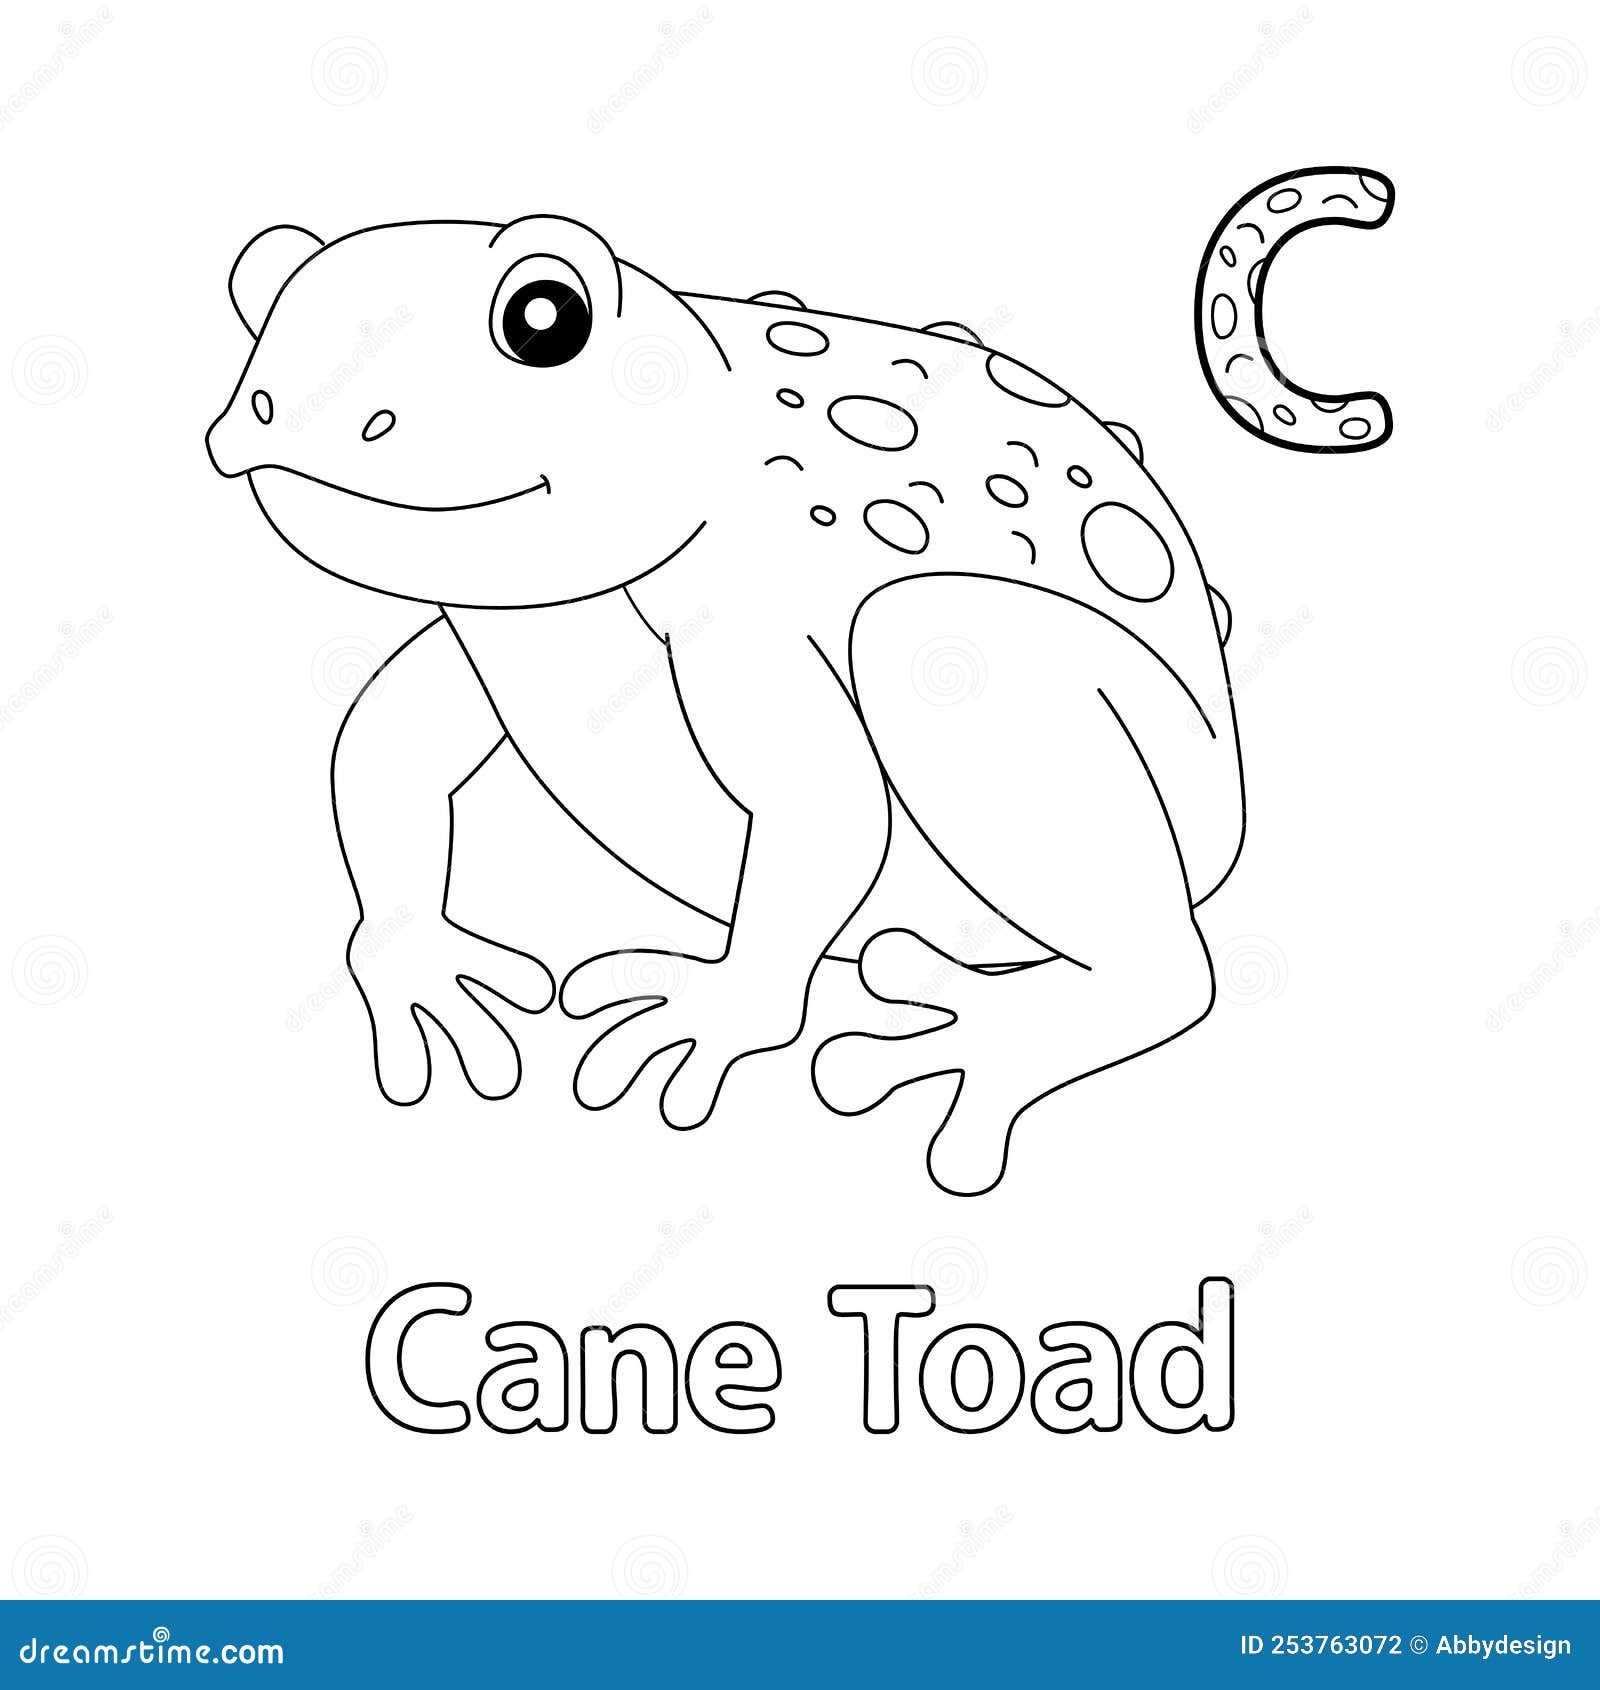 Cane toad alphabet abc coloring page c stock vector